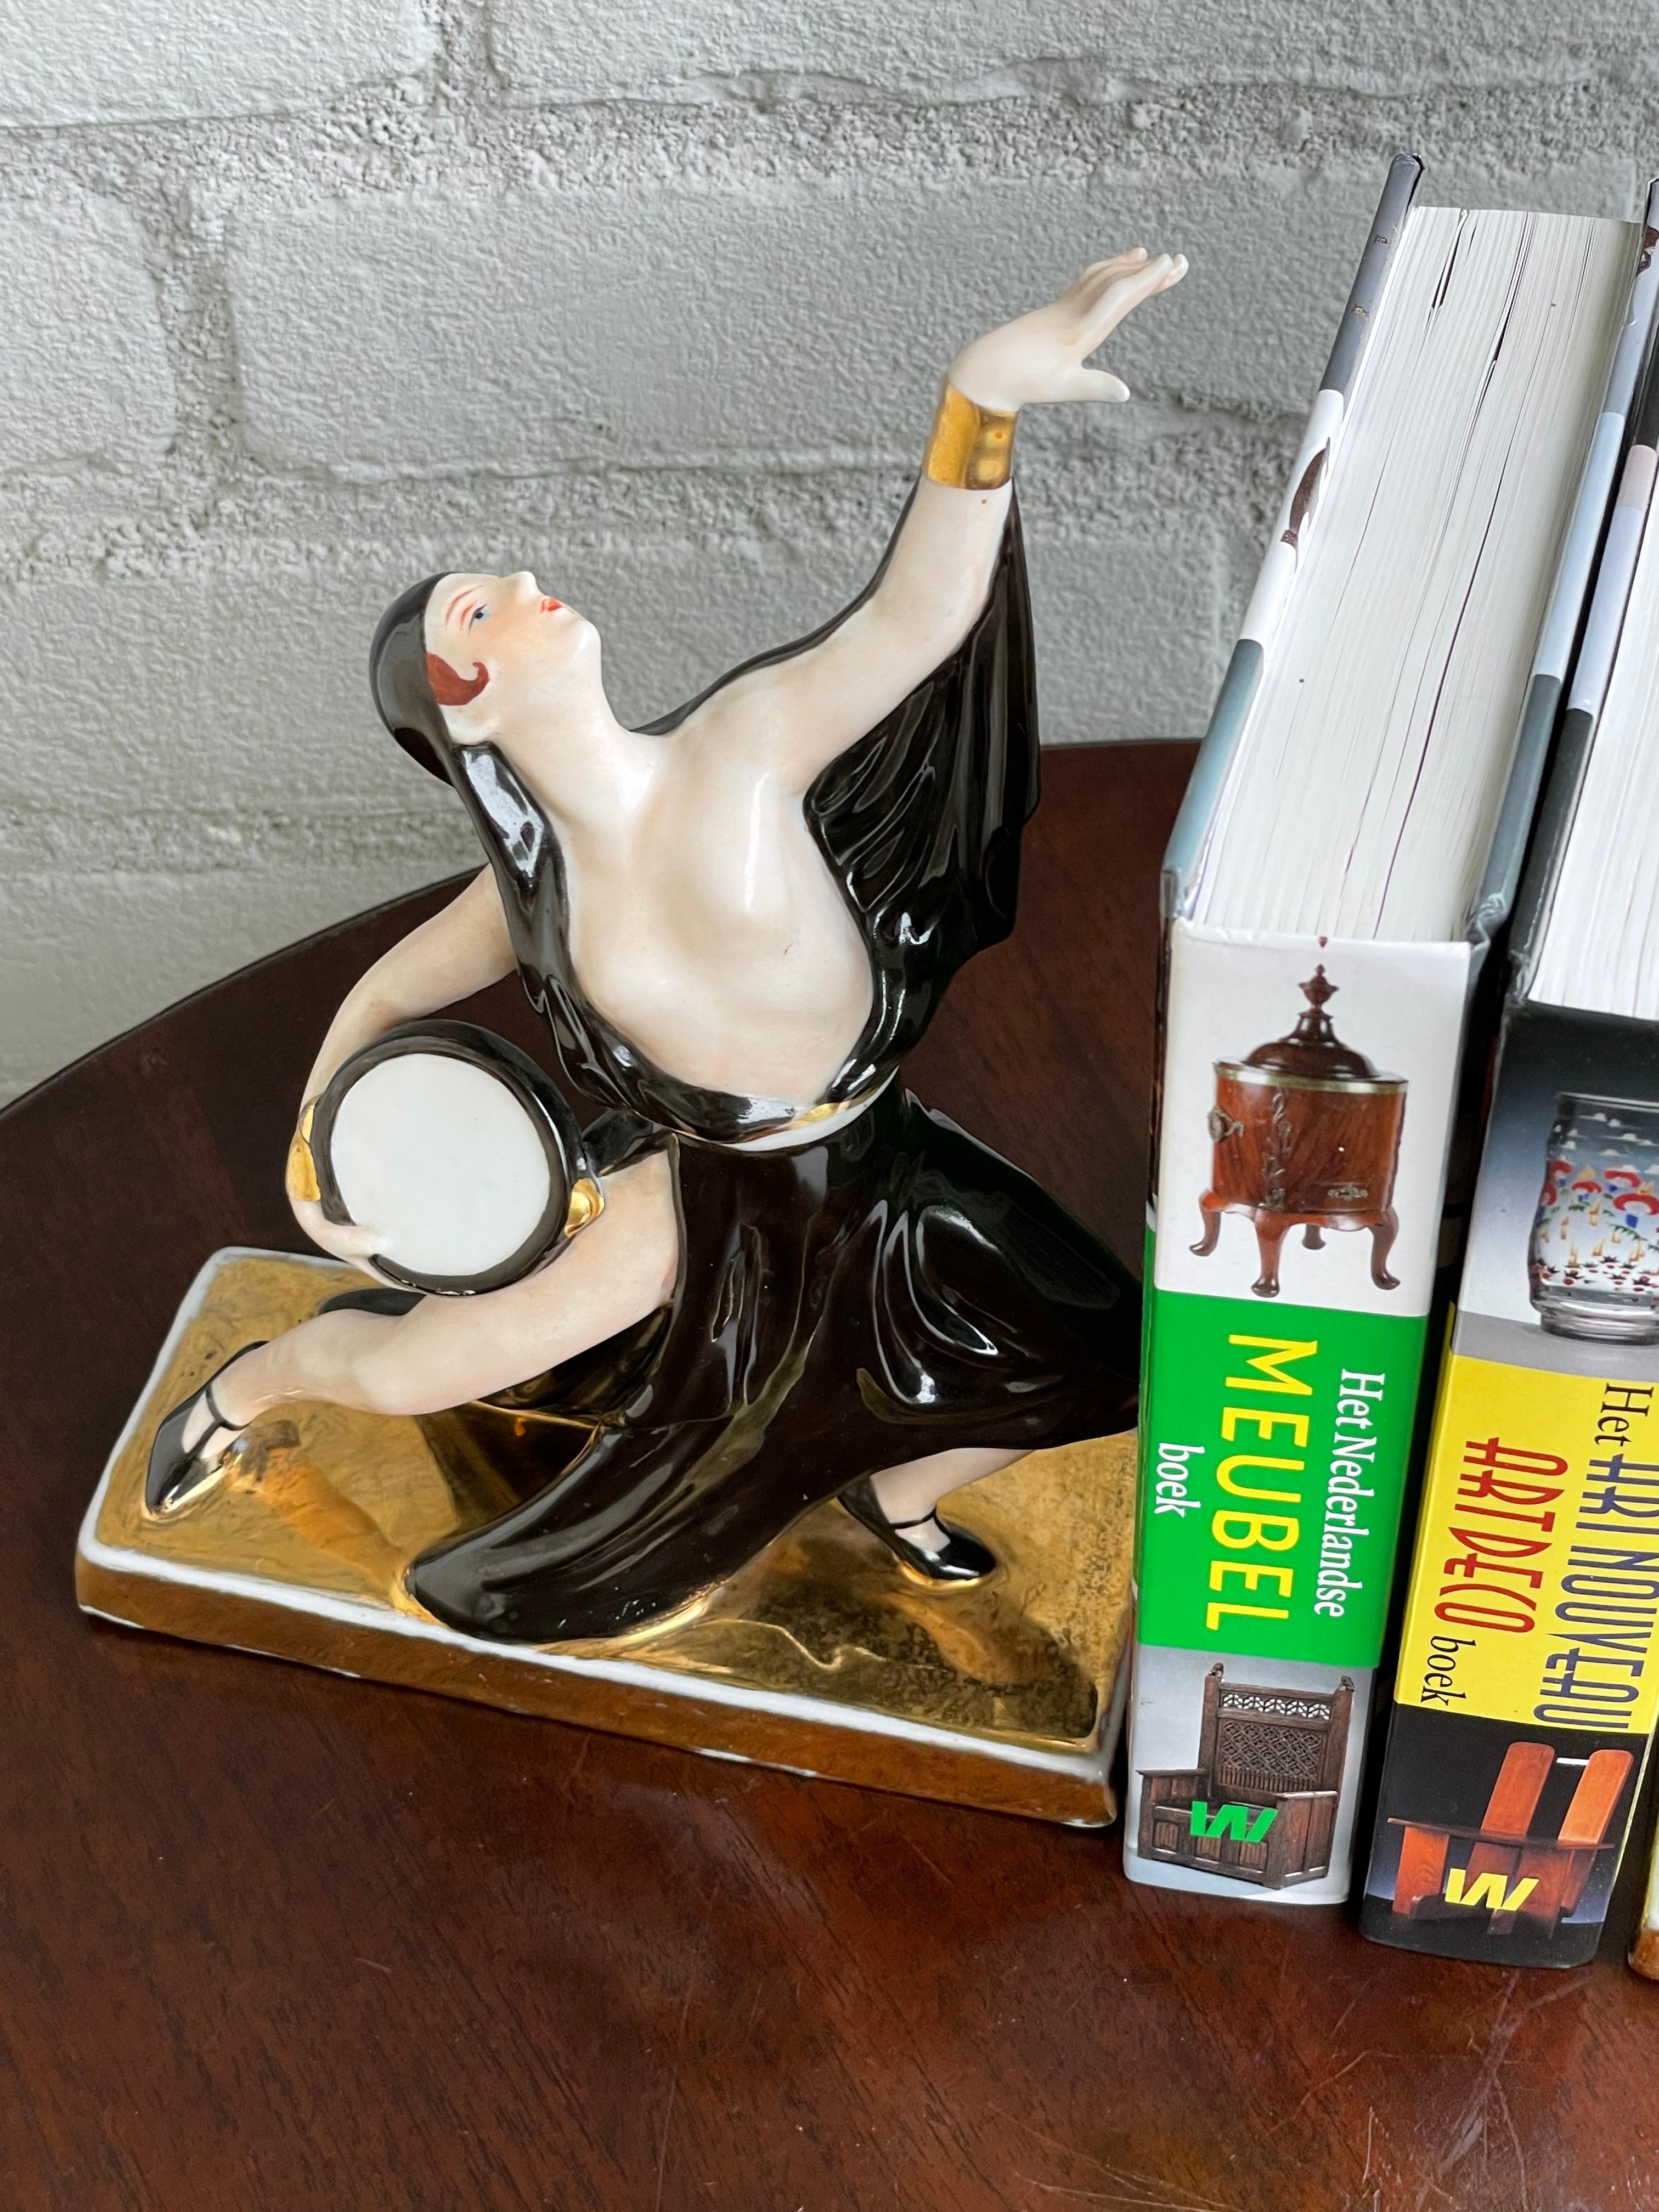 Rare & Stylish Pair of 1920s Porcelain French Art Deco Risque Dancer Bookends For Sale 4